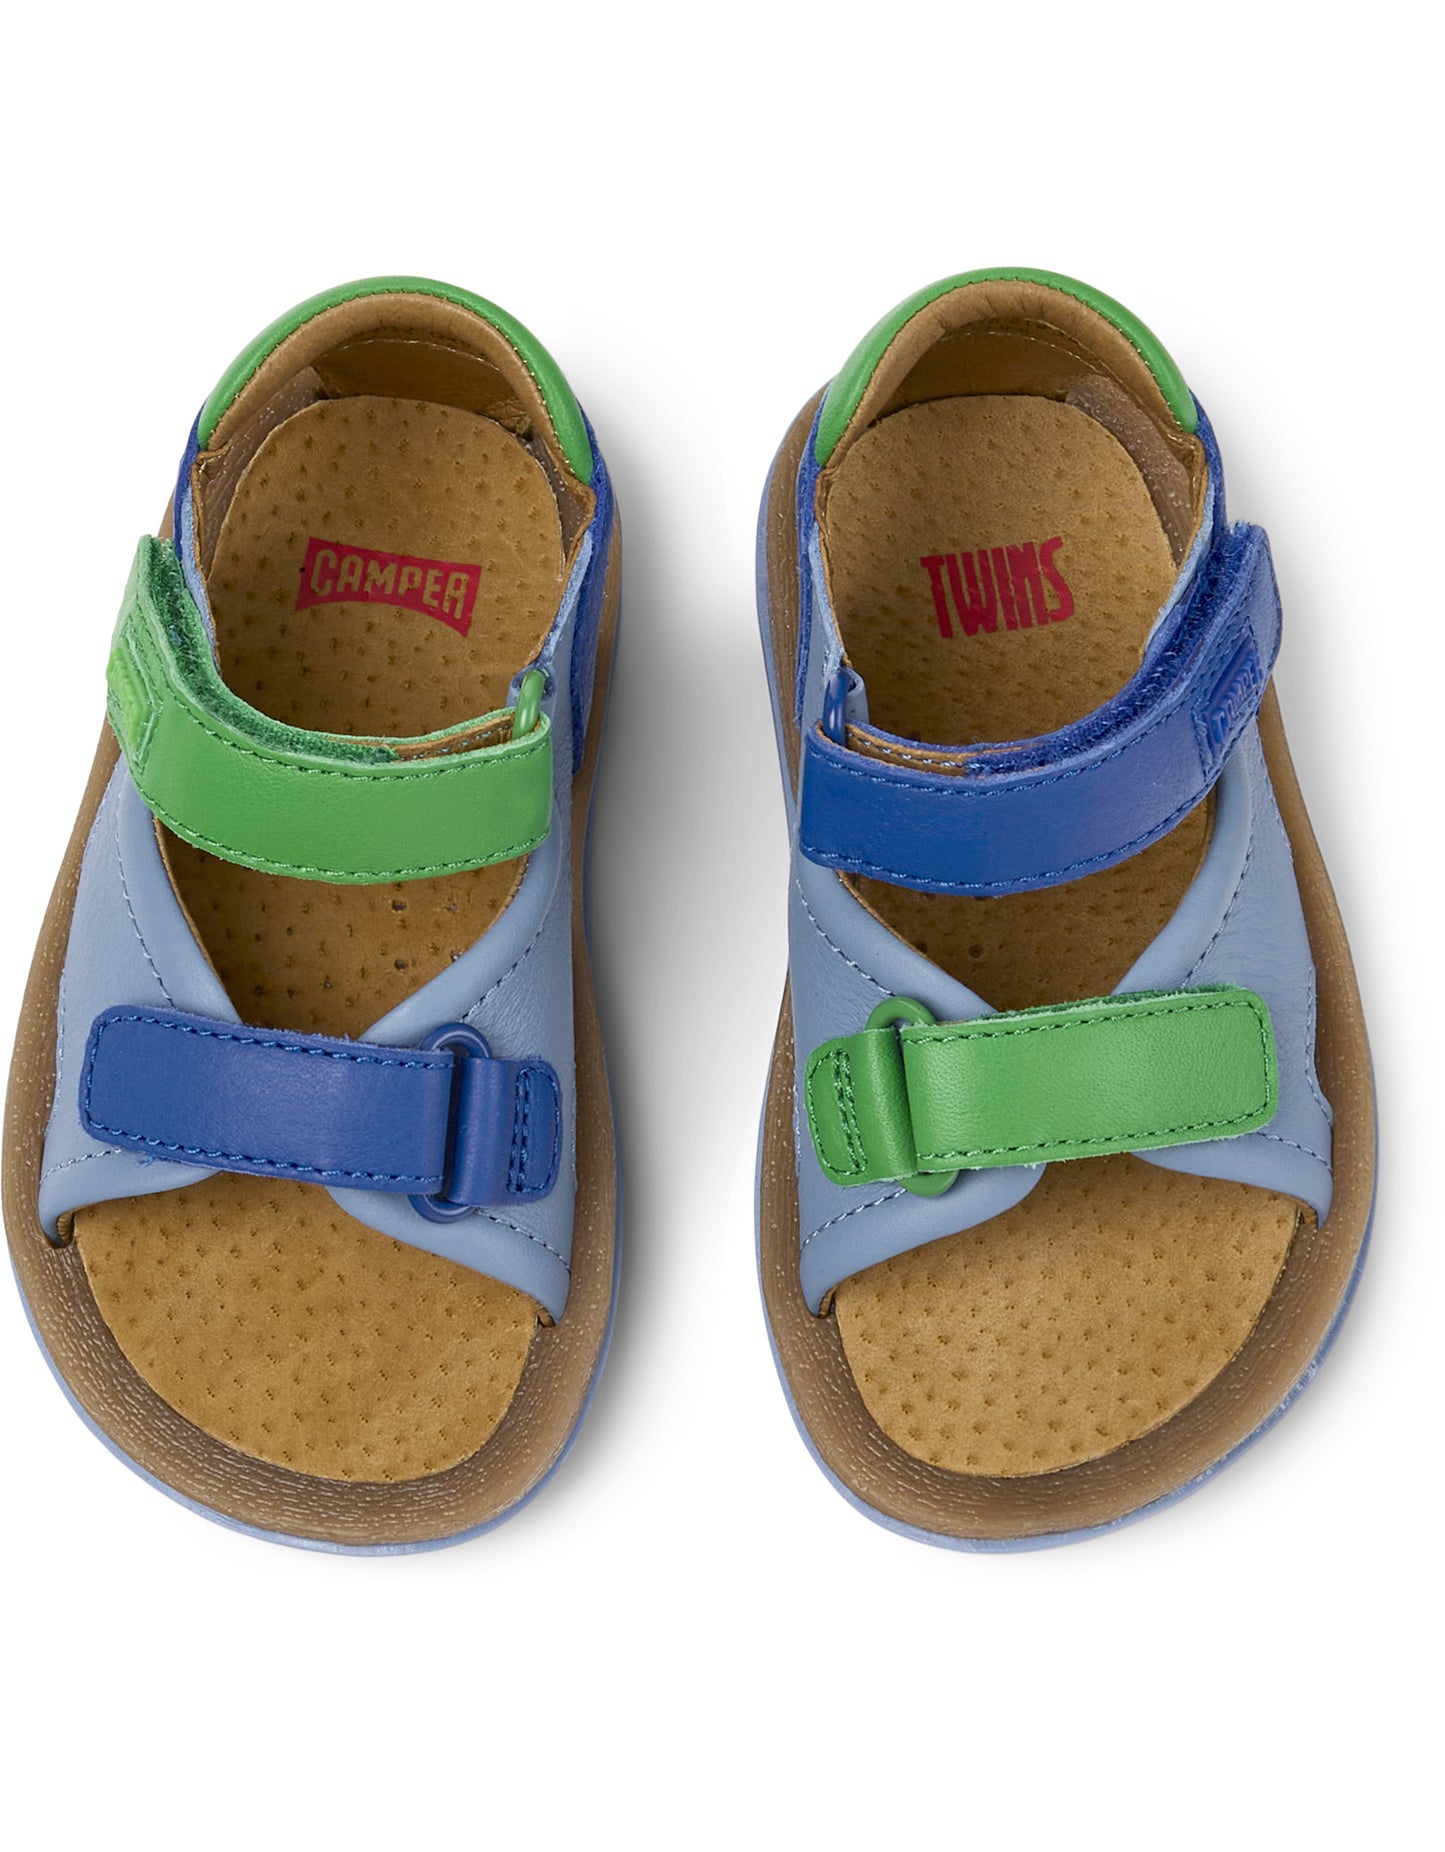 A unisex sandal by Camper, style Twins, open toe with a back, in blue and green. Above view of a pair.